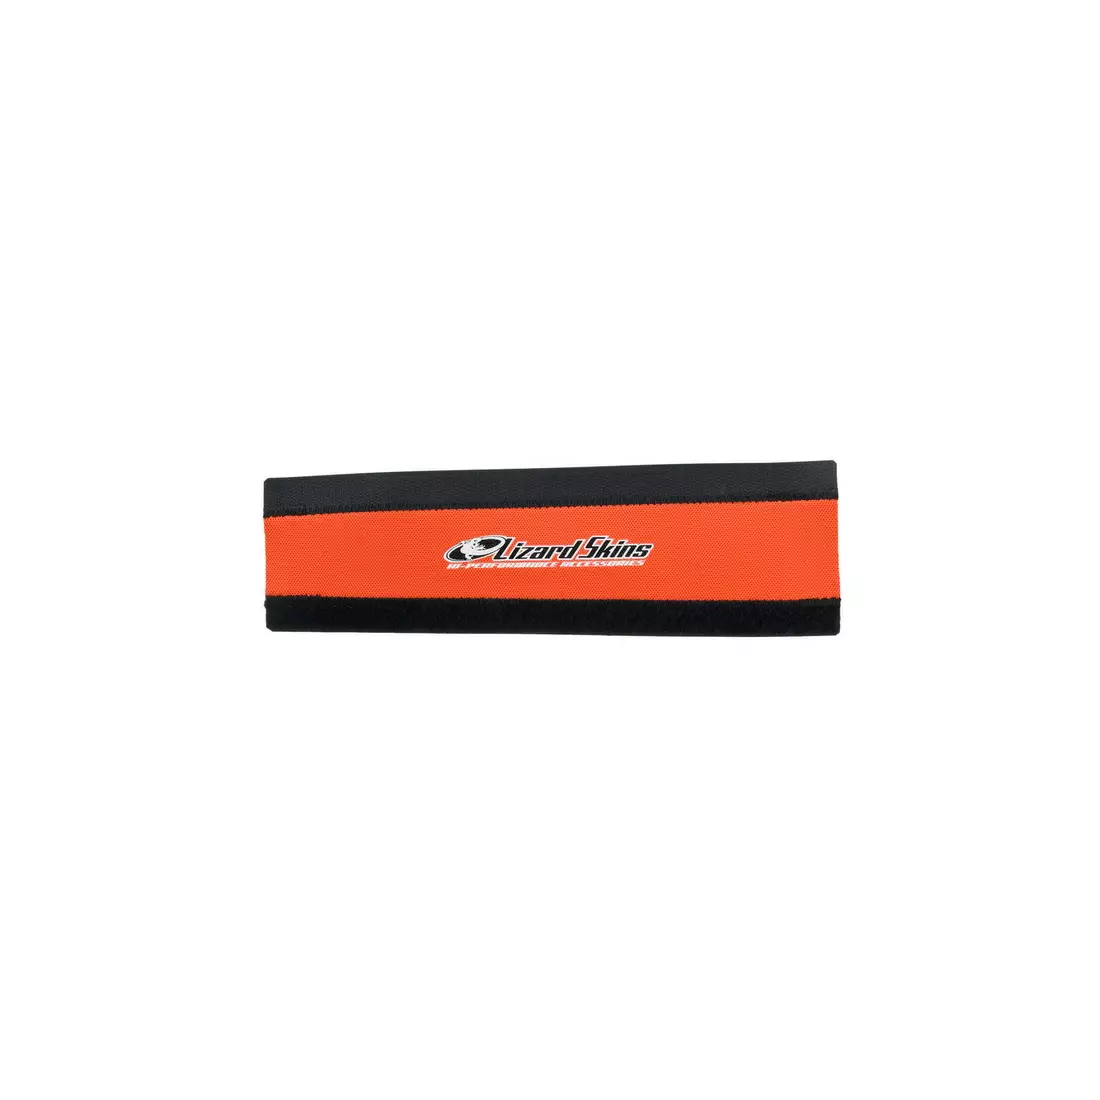 LIZARDSKINS bicycle frame cover standard (s) orange LZS-CHNDS900